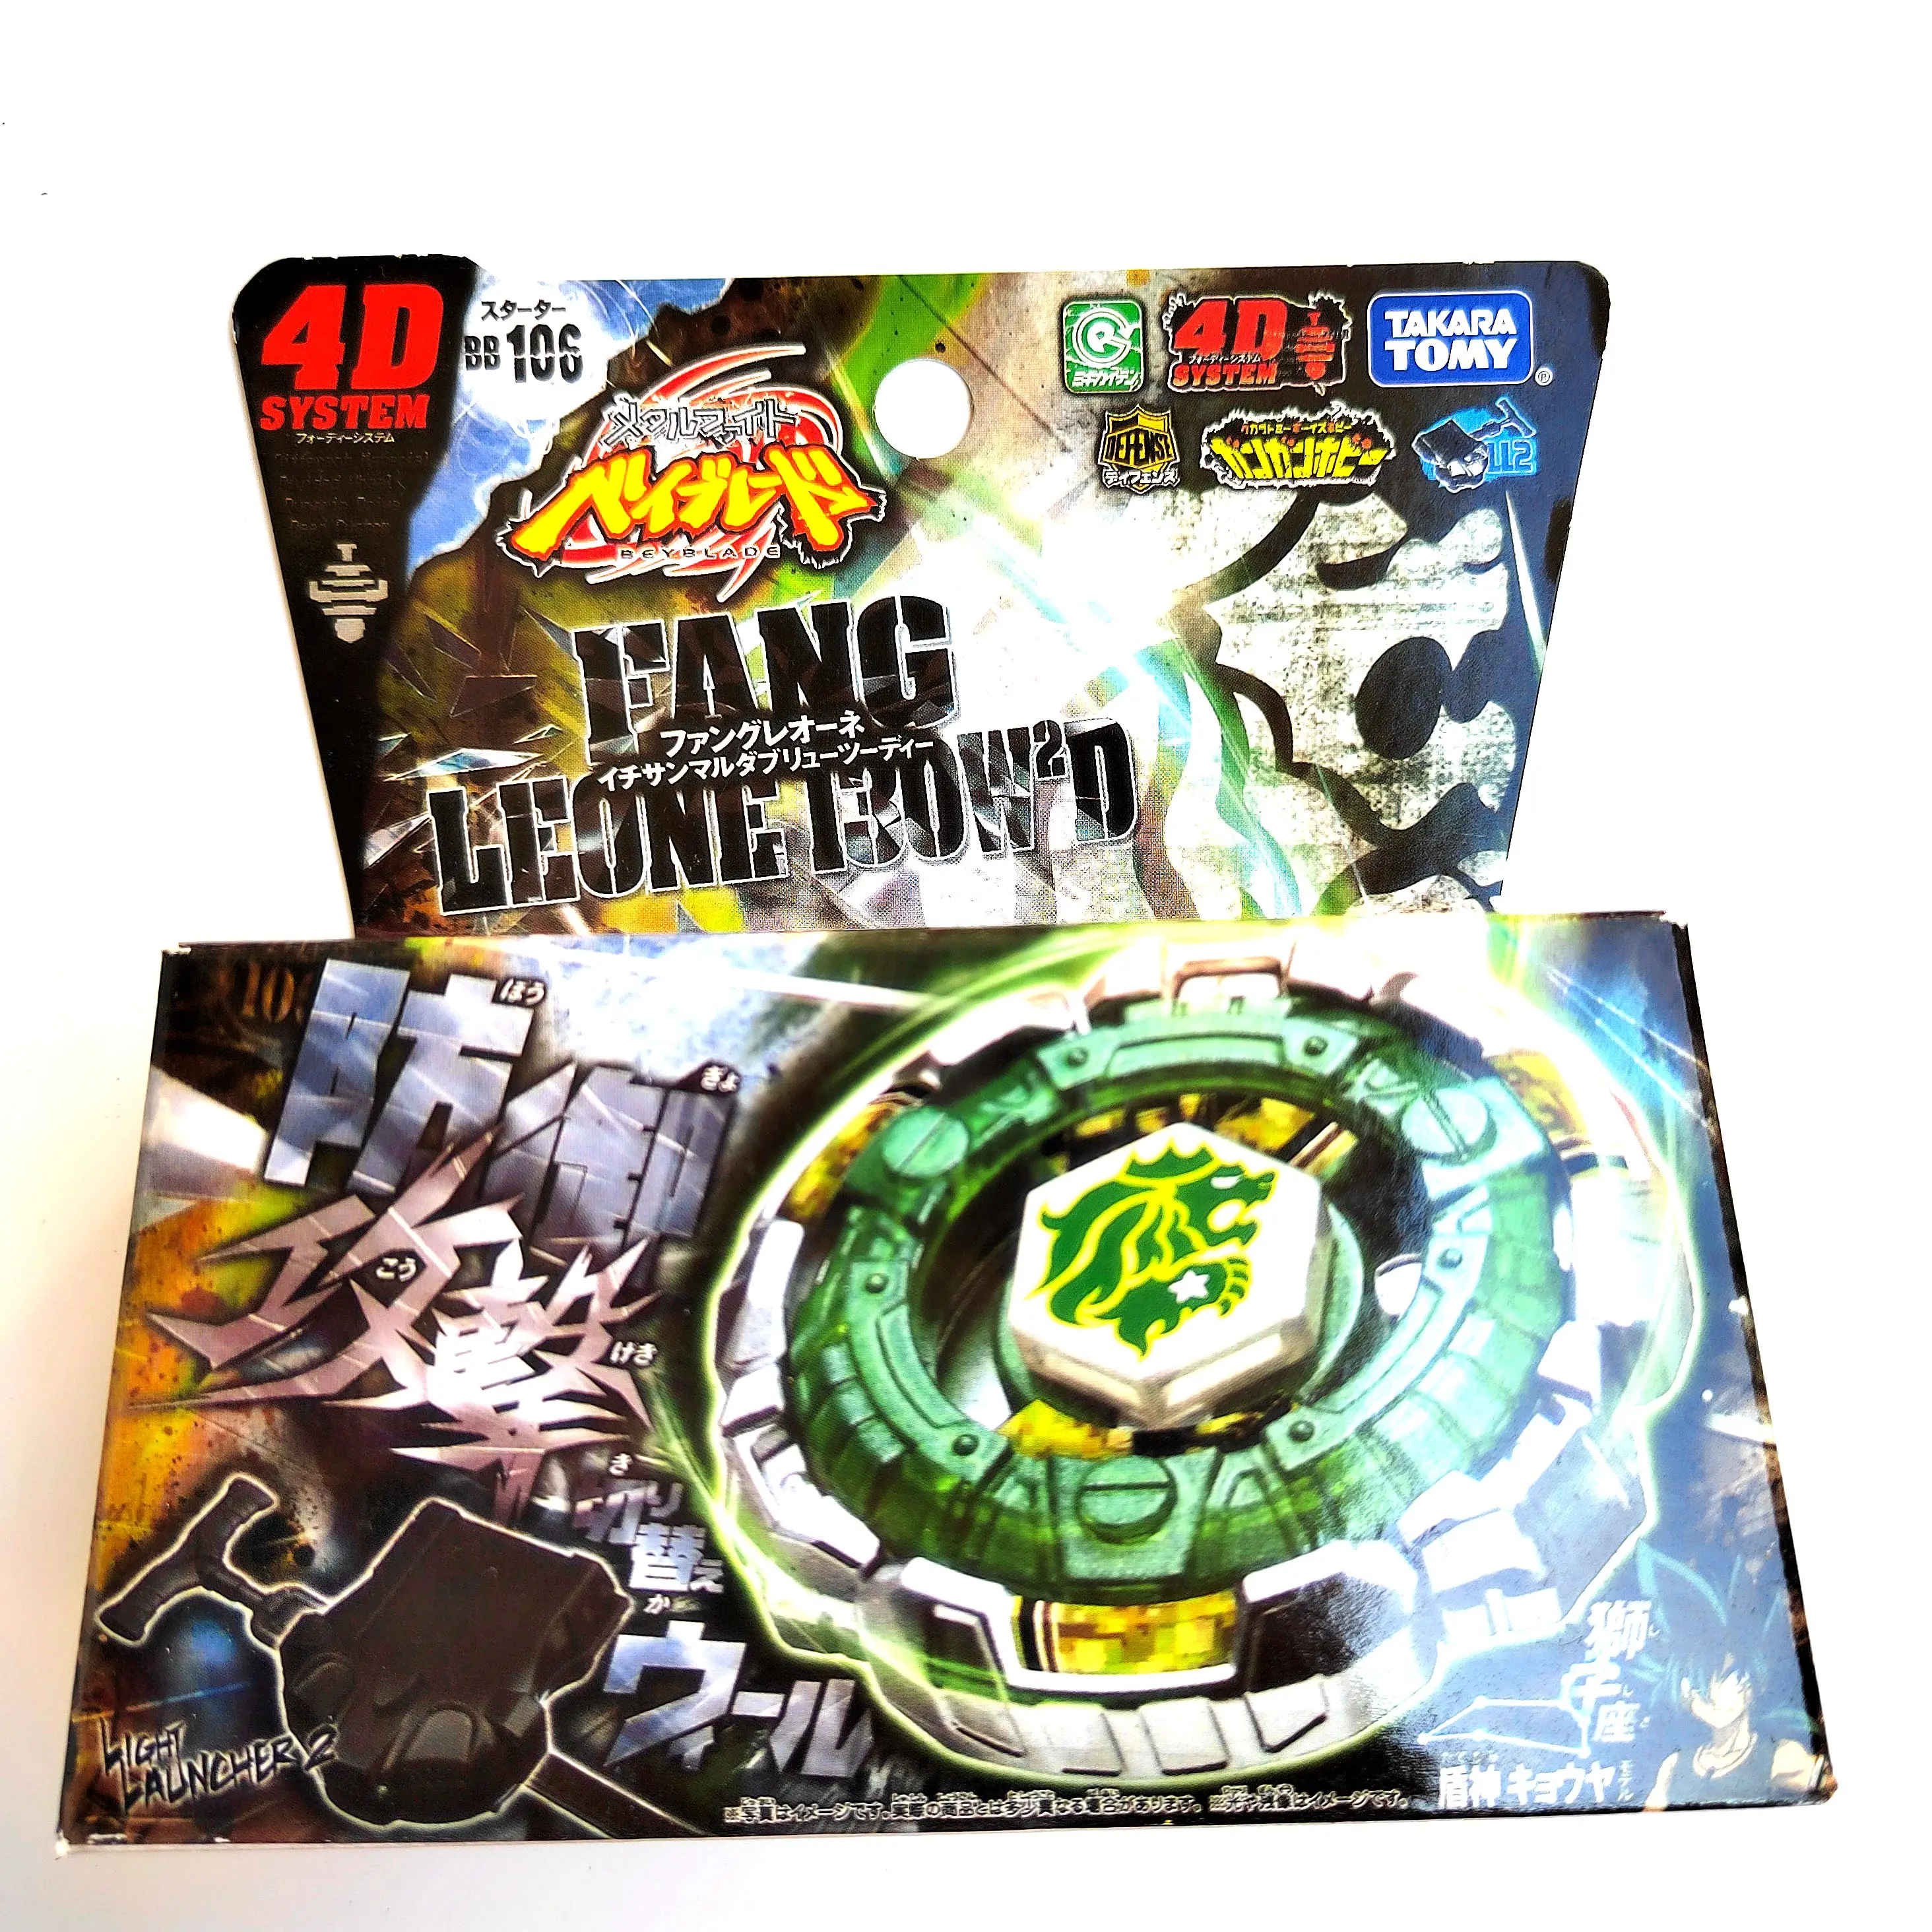 

Takara Tomy Beyblade Metal Battle Fusion Top BB106 FANG LEONE 130WD 4D WITH Light Launcher